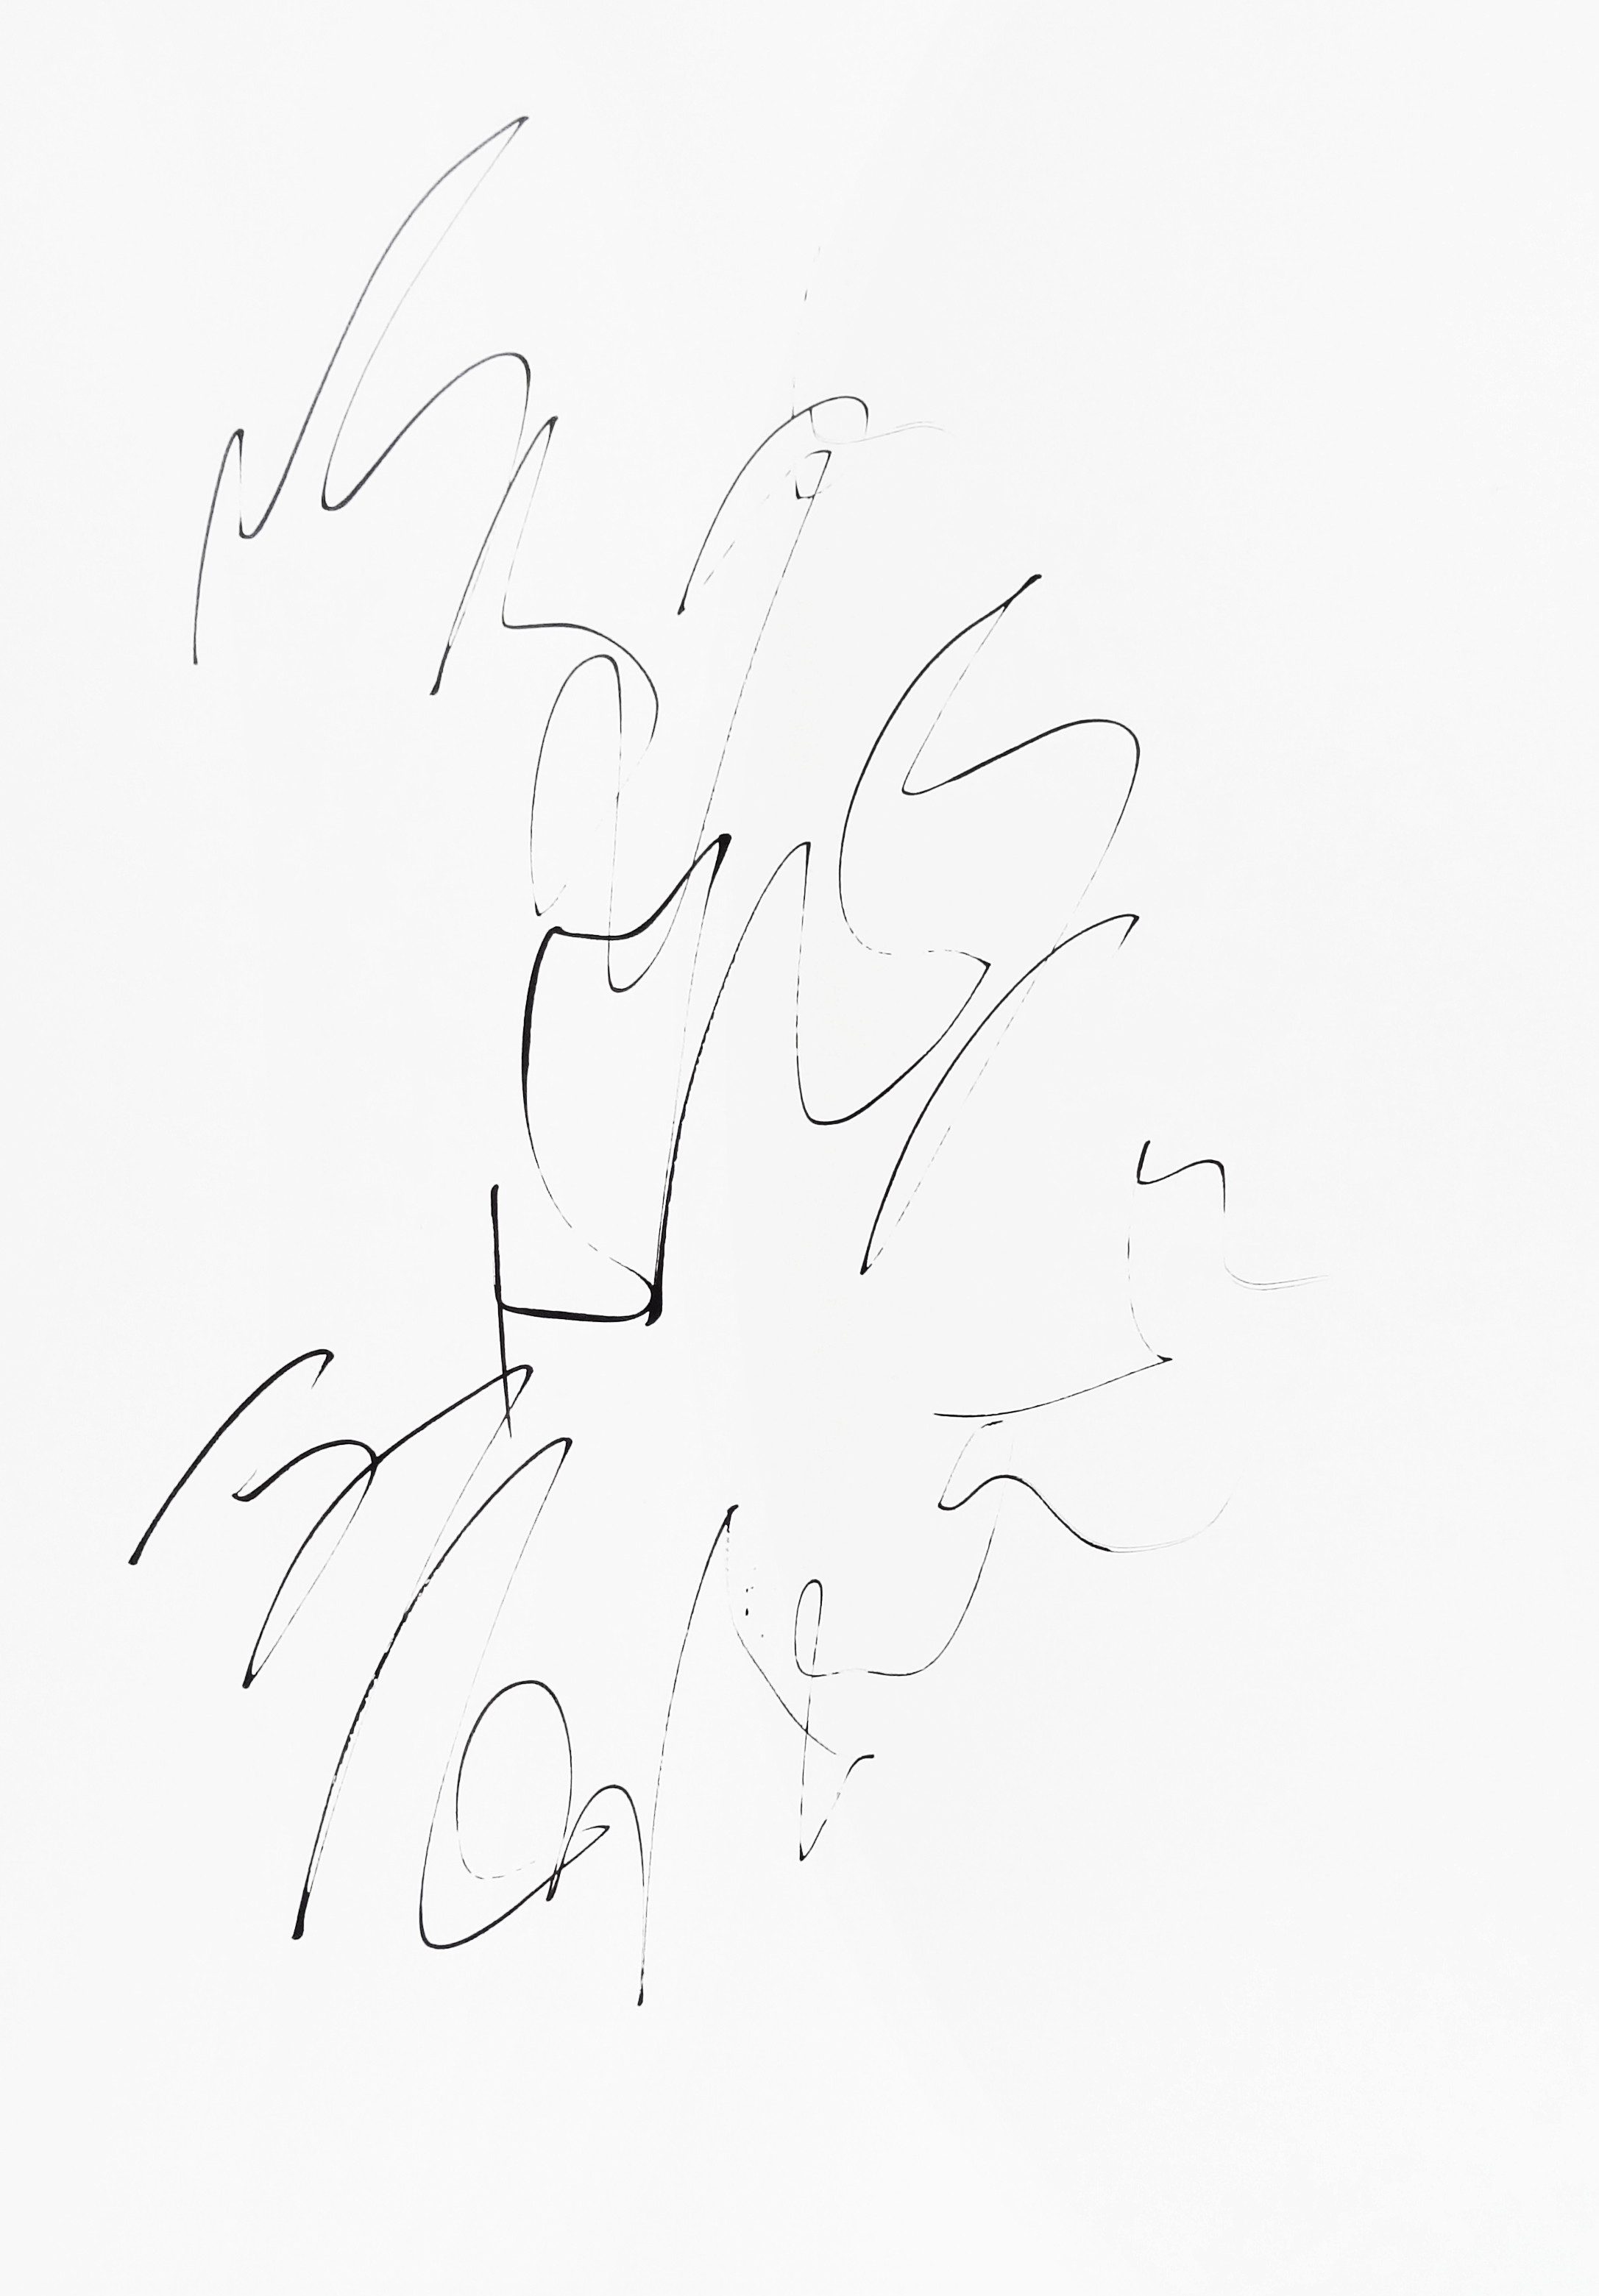  rhythm and flow studies, 2019 calligraphy ink on paper 42,0 x 29,7 cm (8-19) 